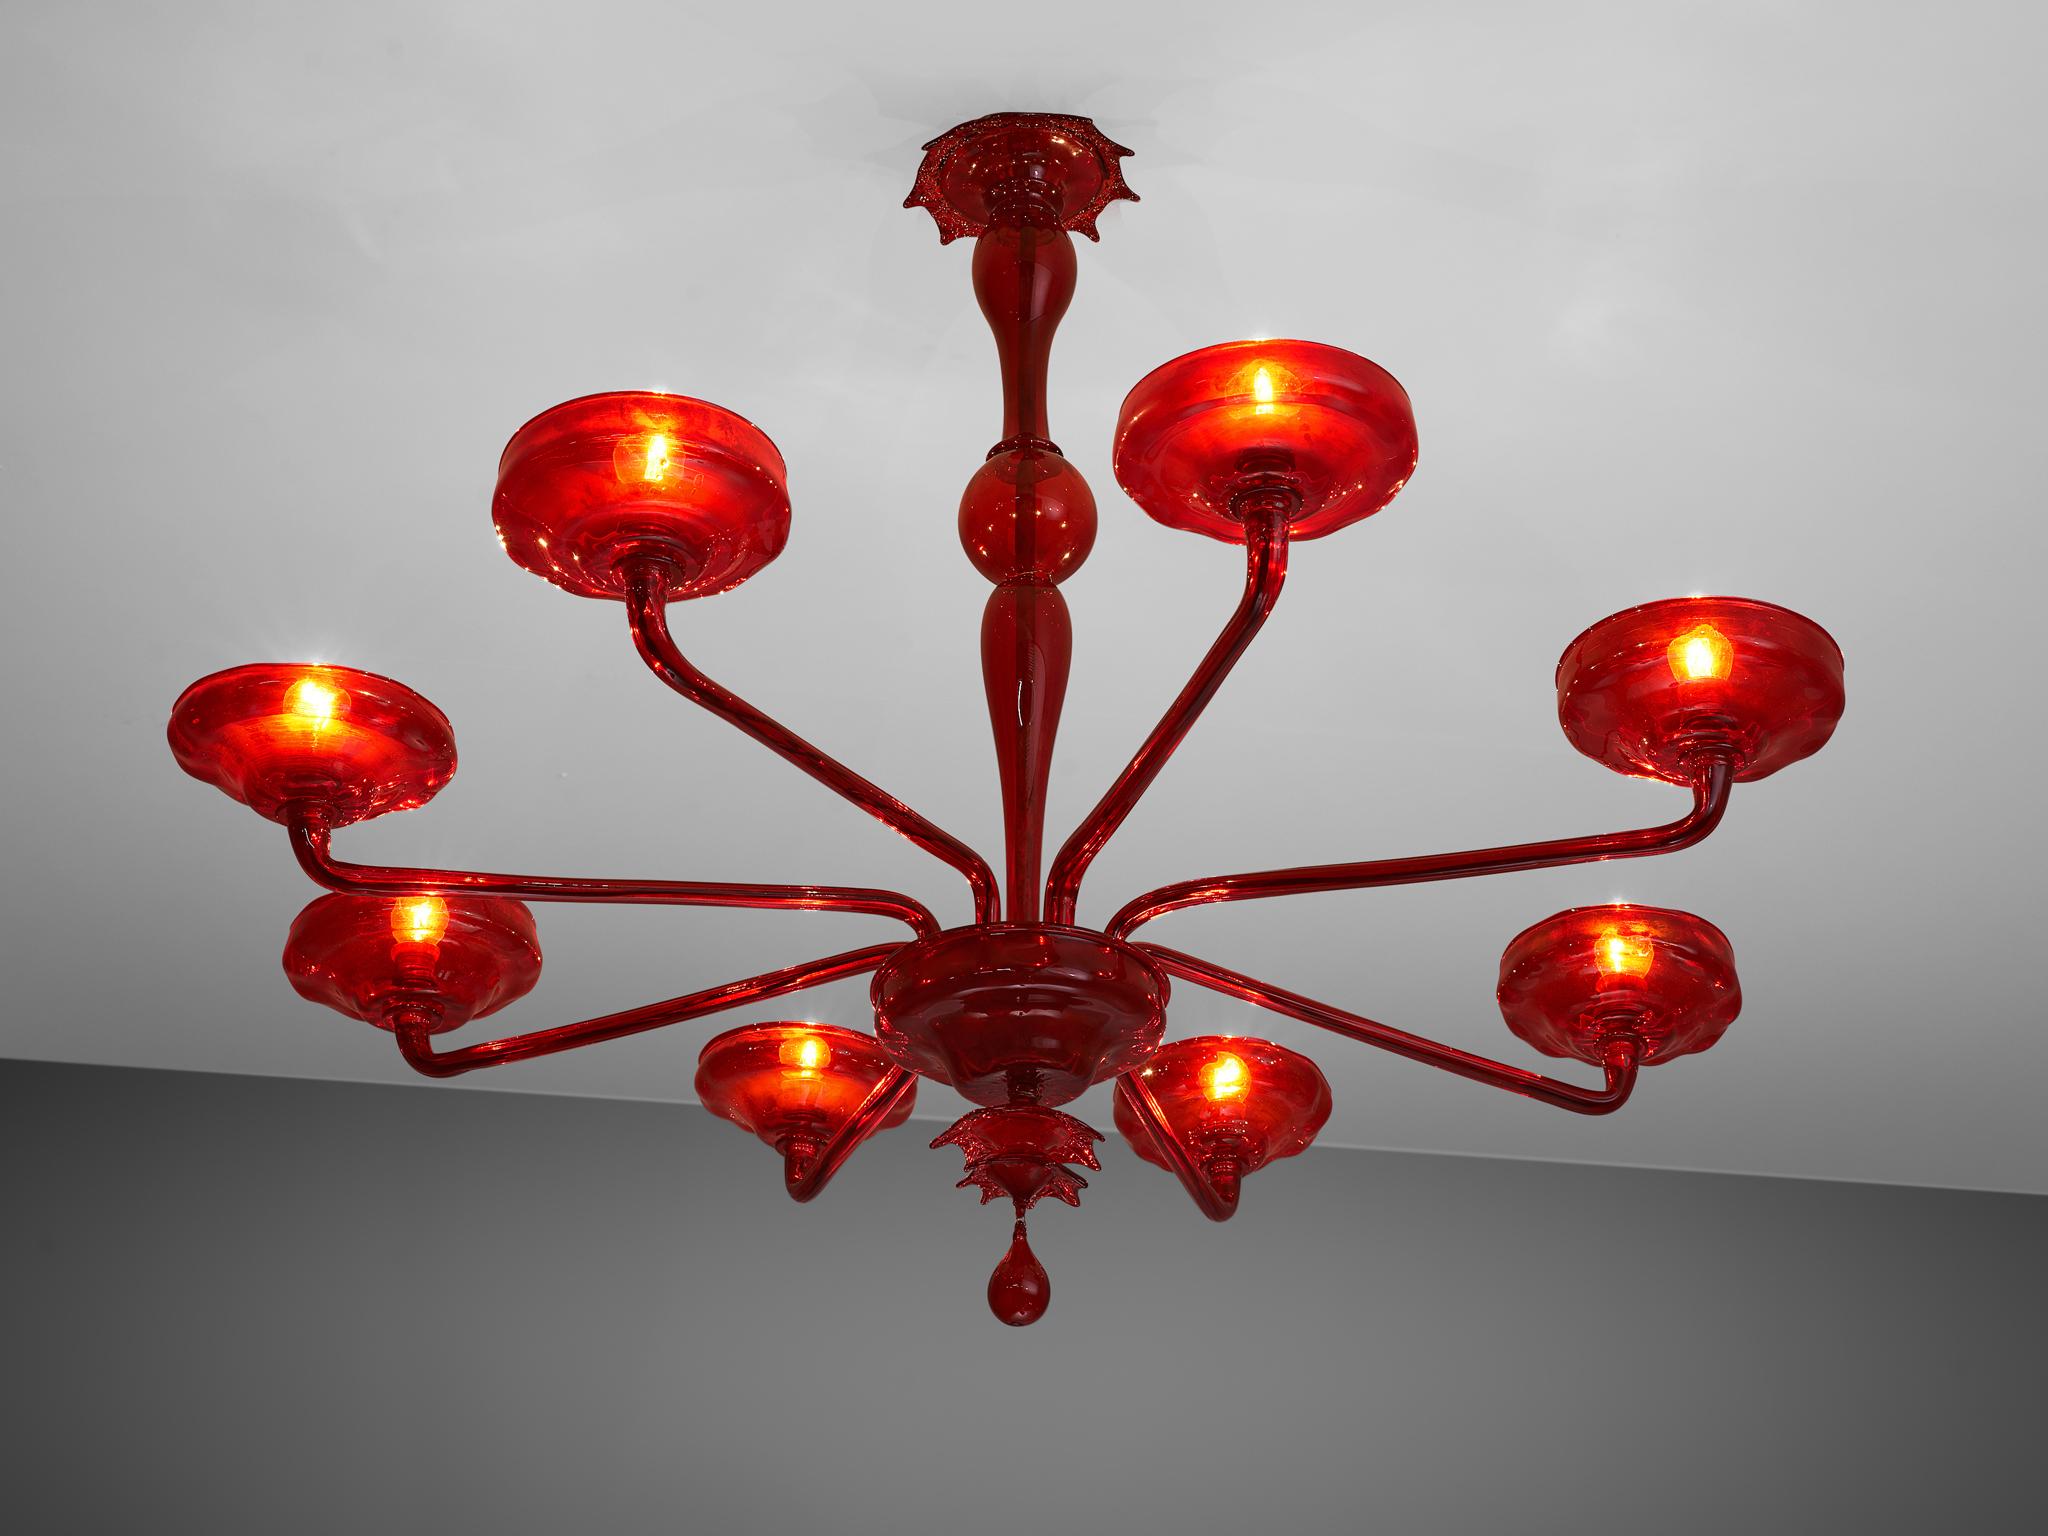 Hand blown chandelier, Murano glass, Italy, 1960s

1960s Venetian chandelier composed of ruby red Murano glass. Handcrafted and executed with modern lines in combination with the elegance of Venetian traditions. The eight long arms, each holding a